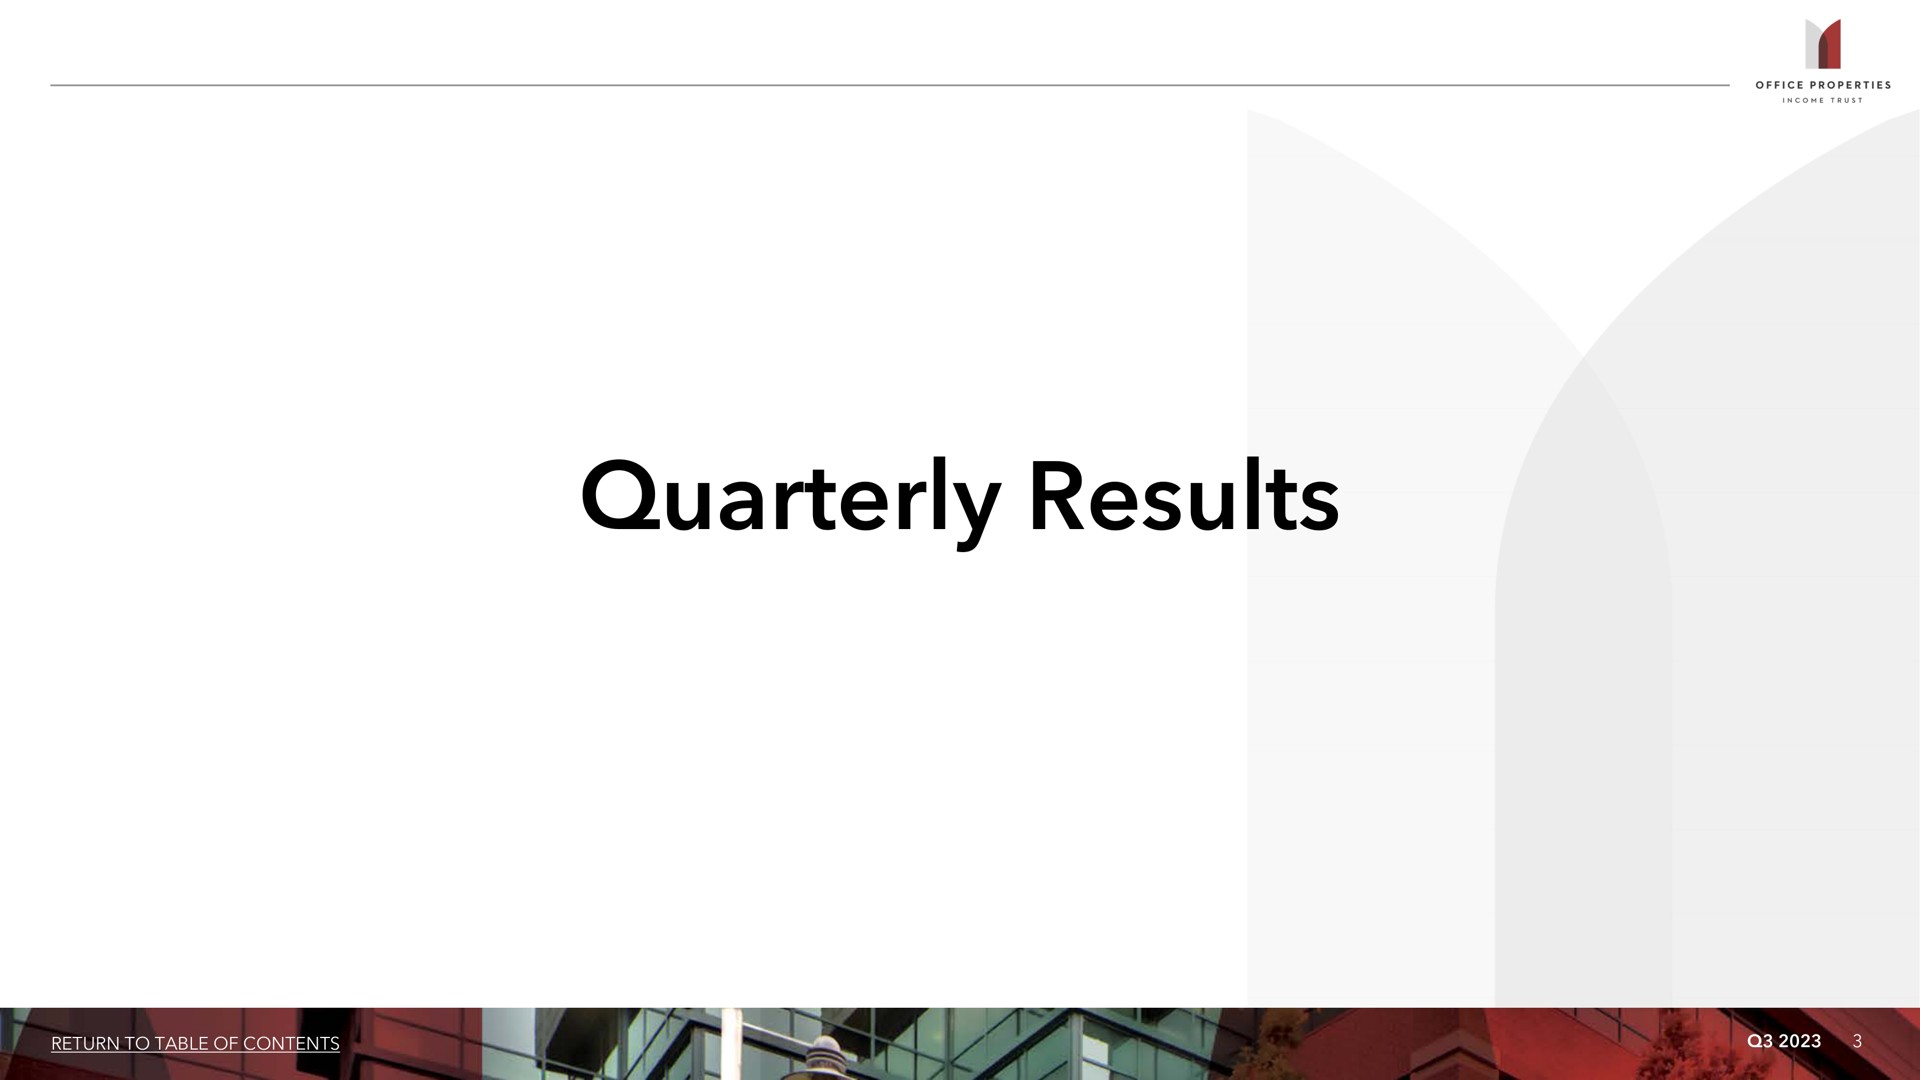 quarterly results | Office Properties Income Trust